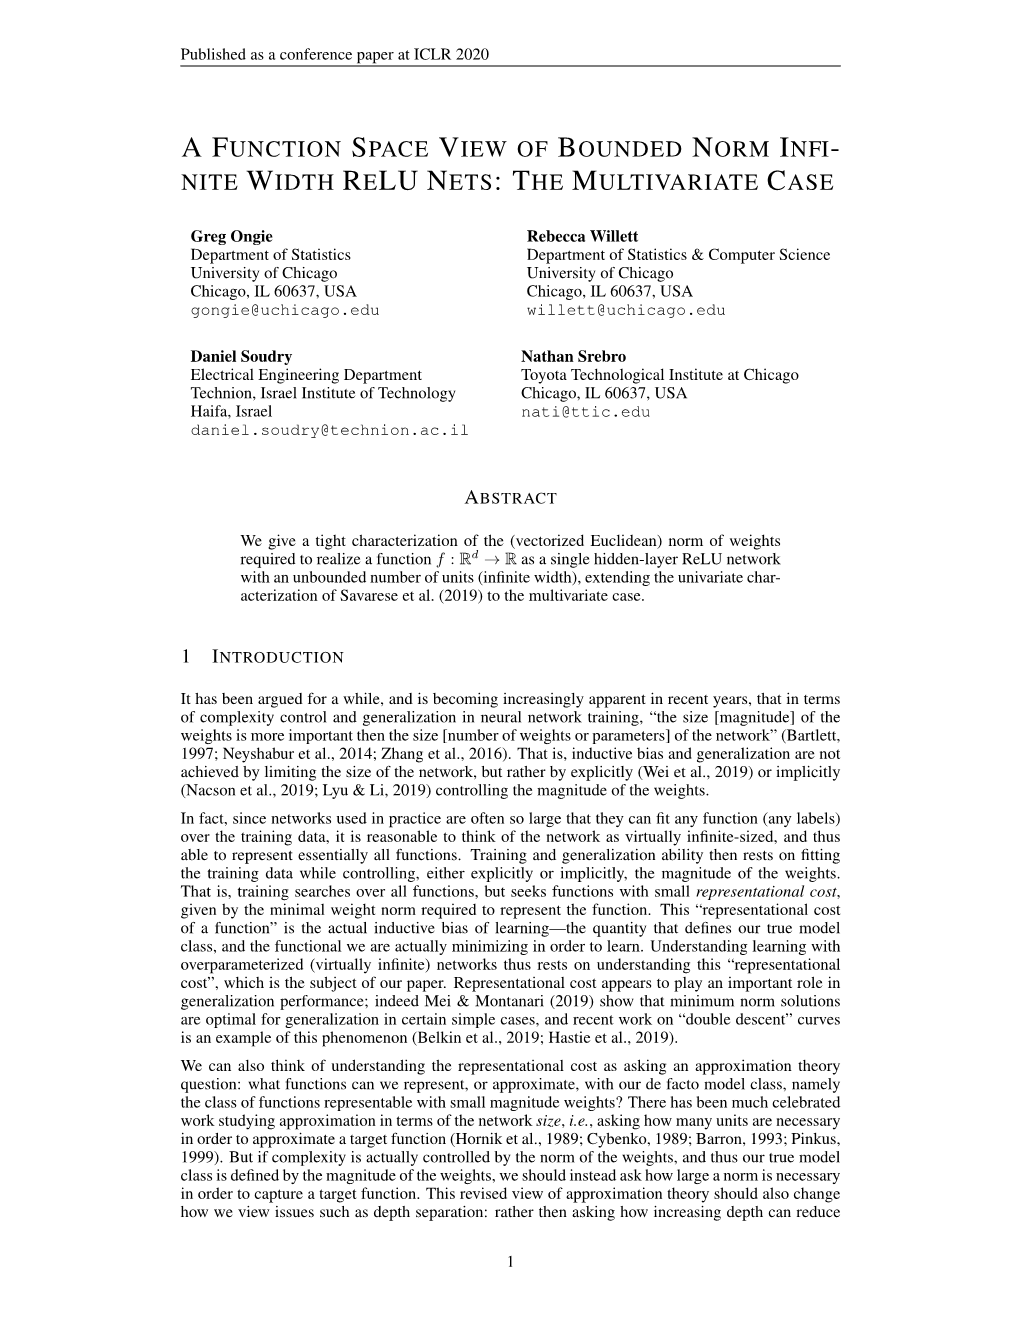 A Function Space View of Bounded Norm Infi- Nite Width Relu Nets: the Multivariate Case